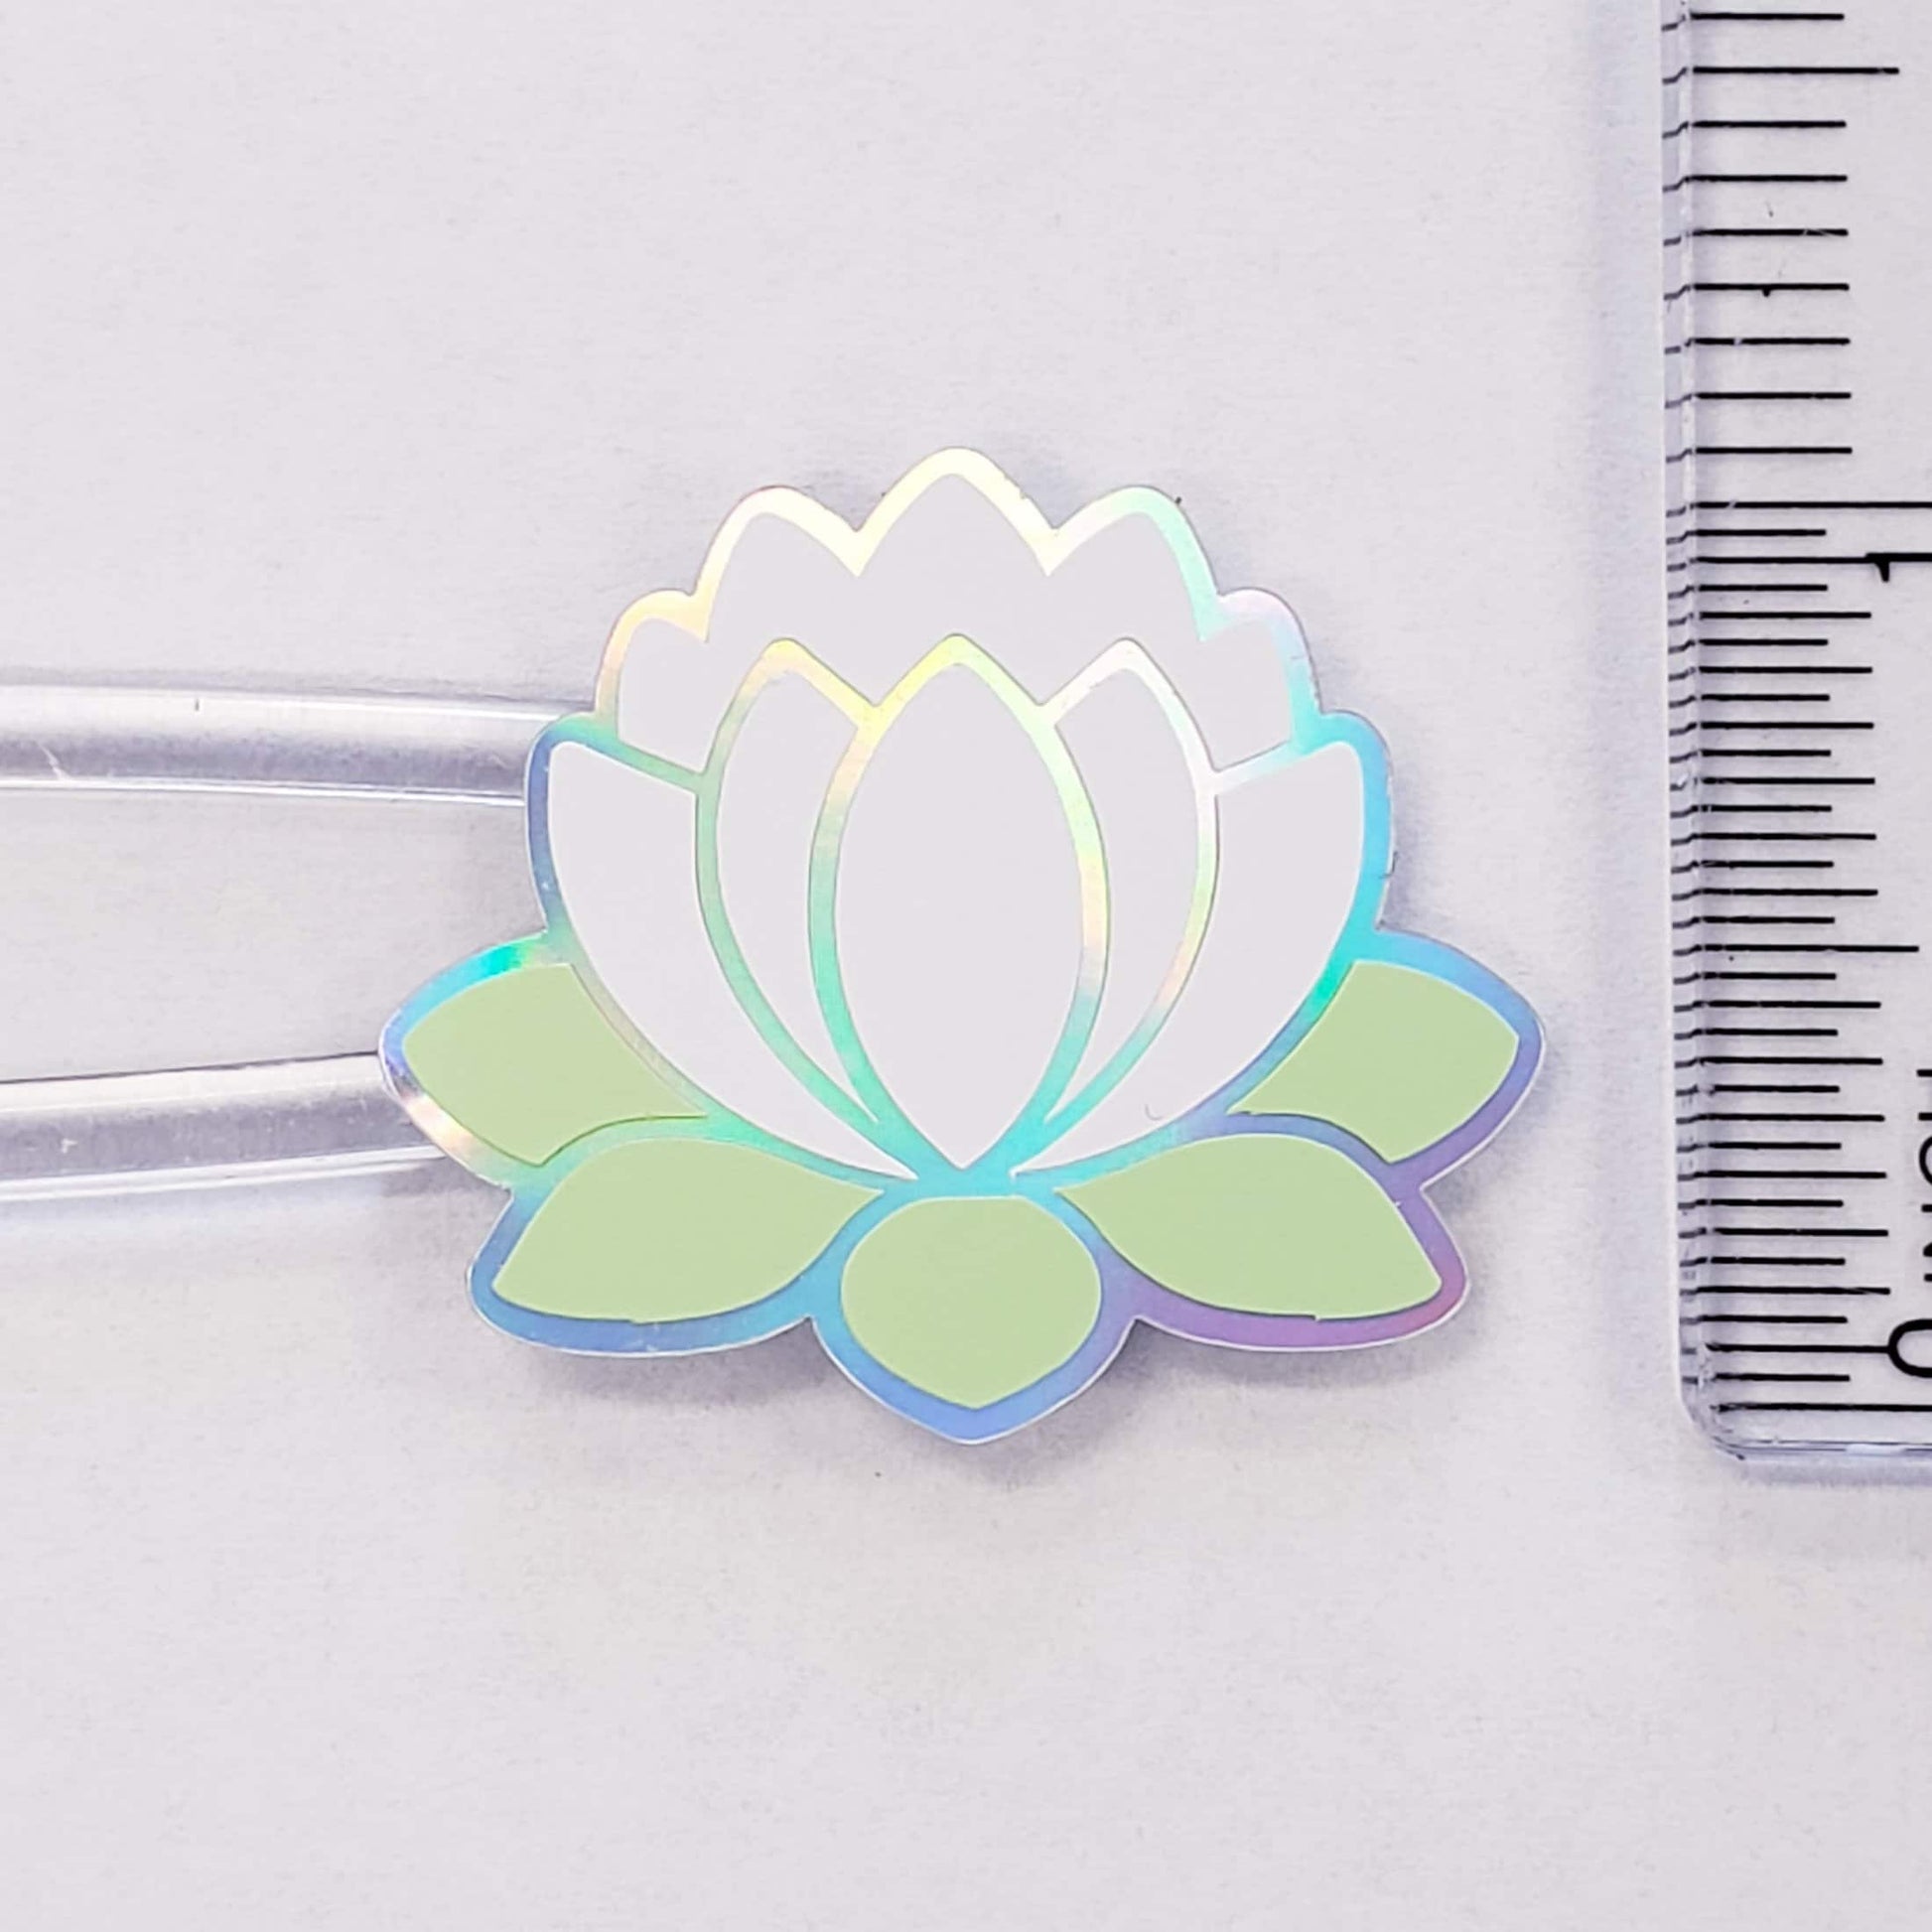 White lotus flower stickers, set of 20 peel and stick white water lily flower decals, gift for Easter, Mother's Day and spring weddings.